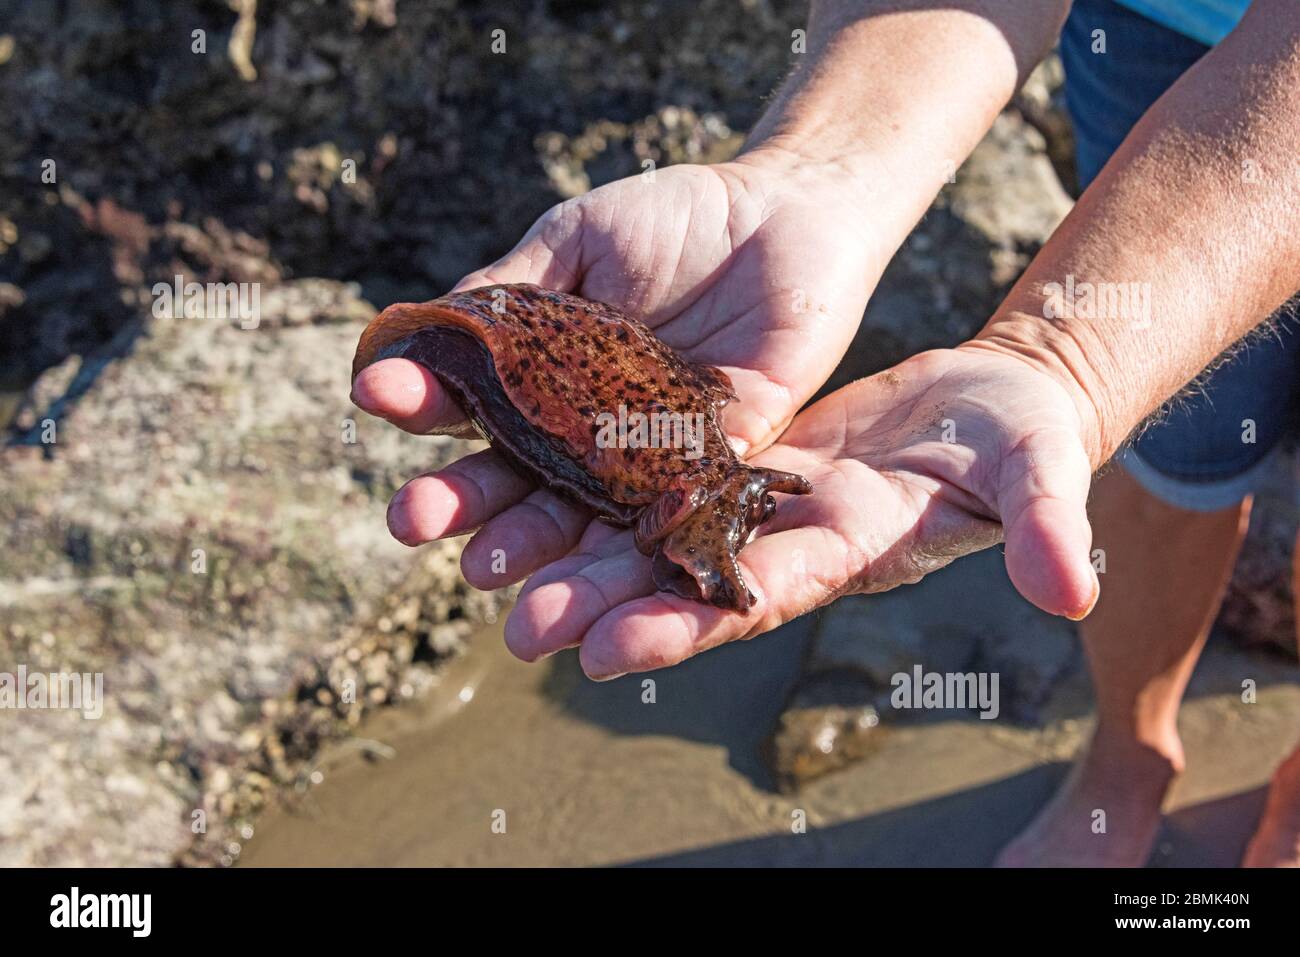 California Sea Hare (Aplysia californica) held carefully in a pair of adult hands. Stock Photo